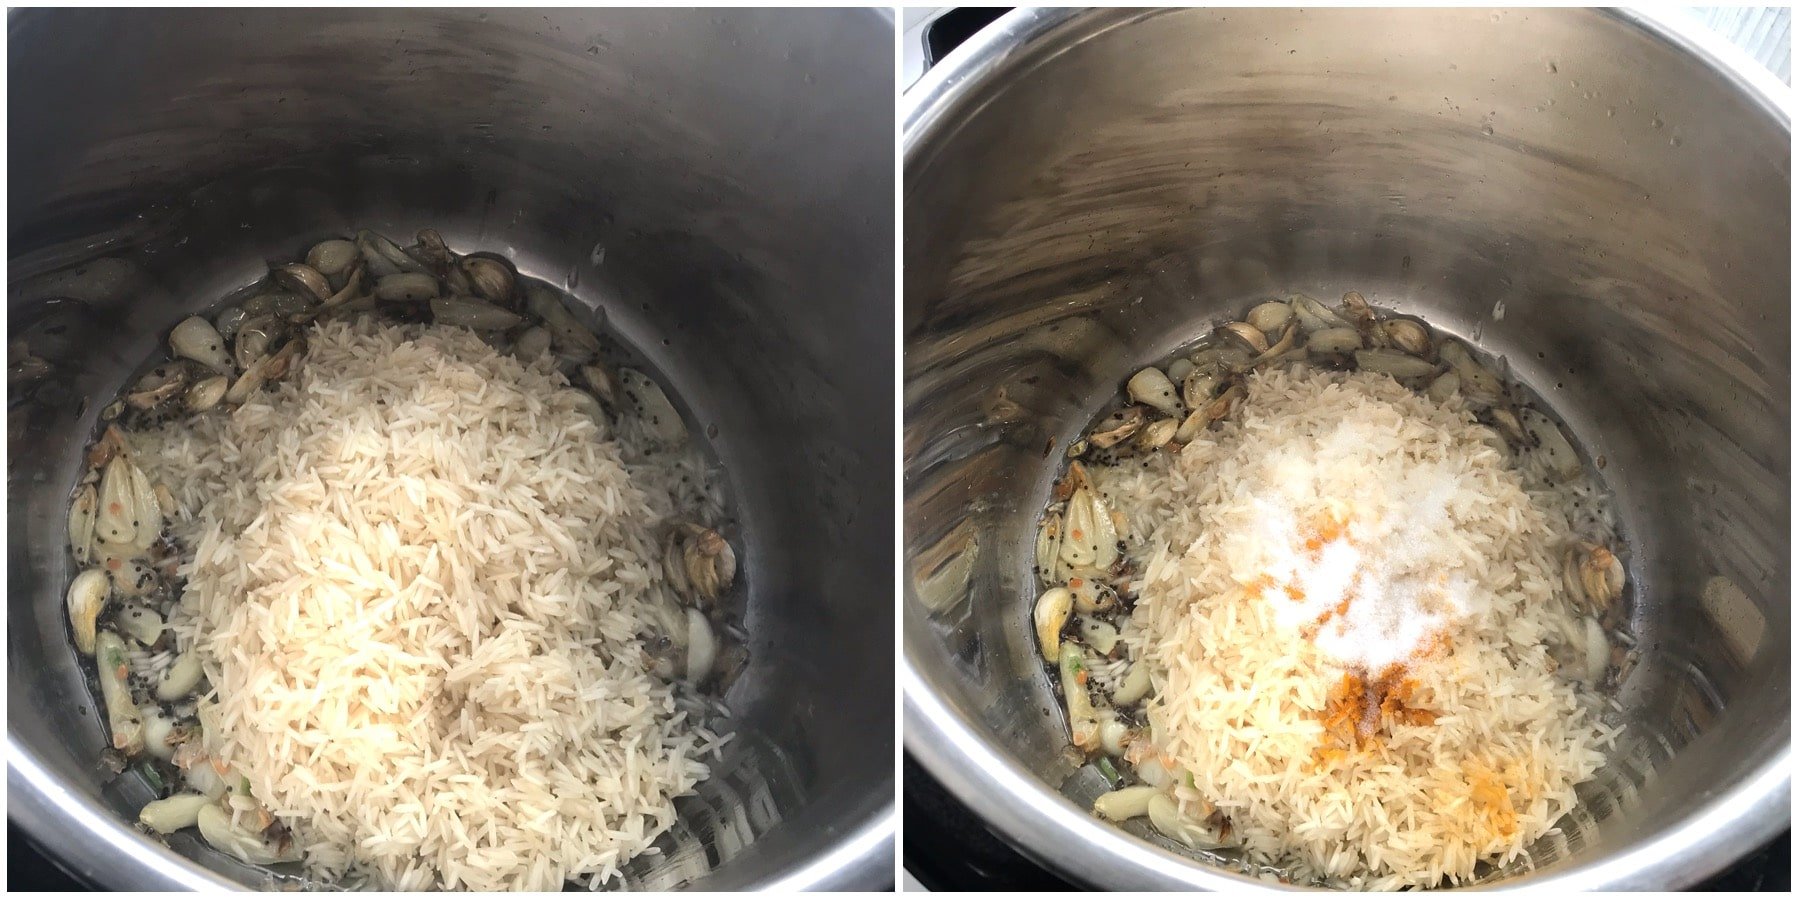 A pot filled with spices, rice, and Garlic